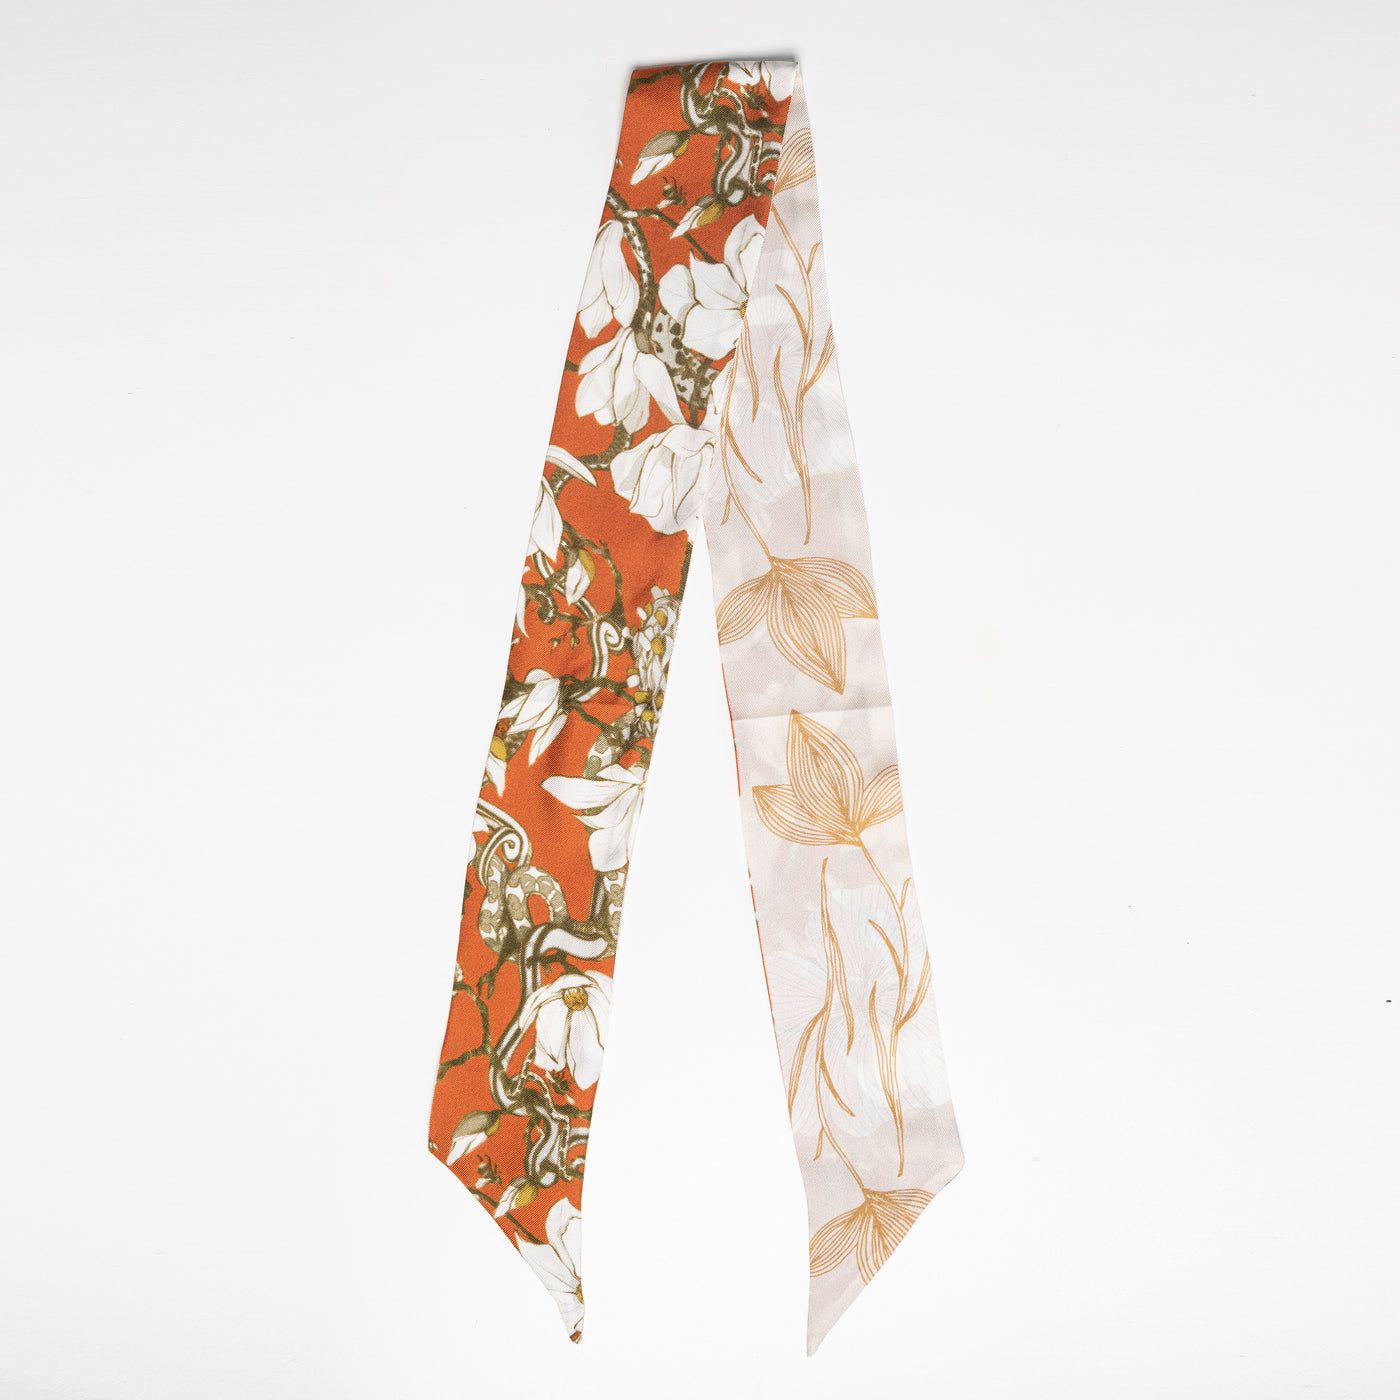 Lark and Ives / Silk Scarf / Twilly Scarf / Thin Scarf / Purse Accessories / Hair Accessories / Magnolia and Abstract Floral Pattern